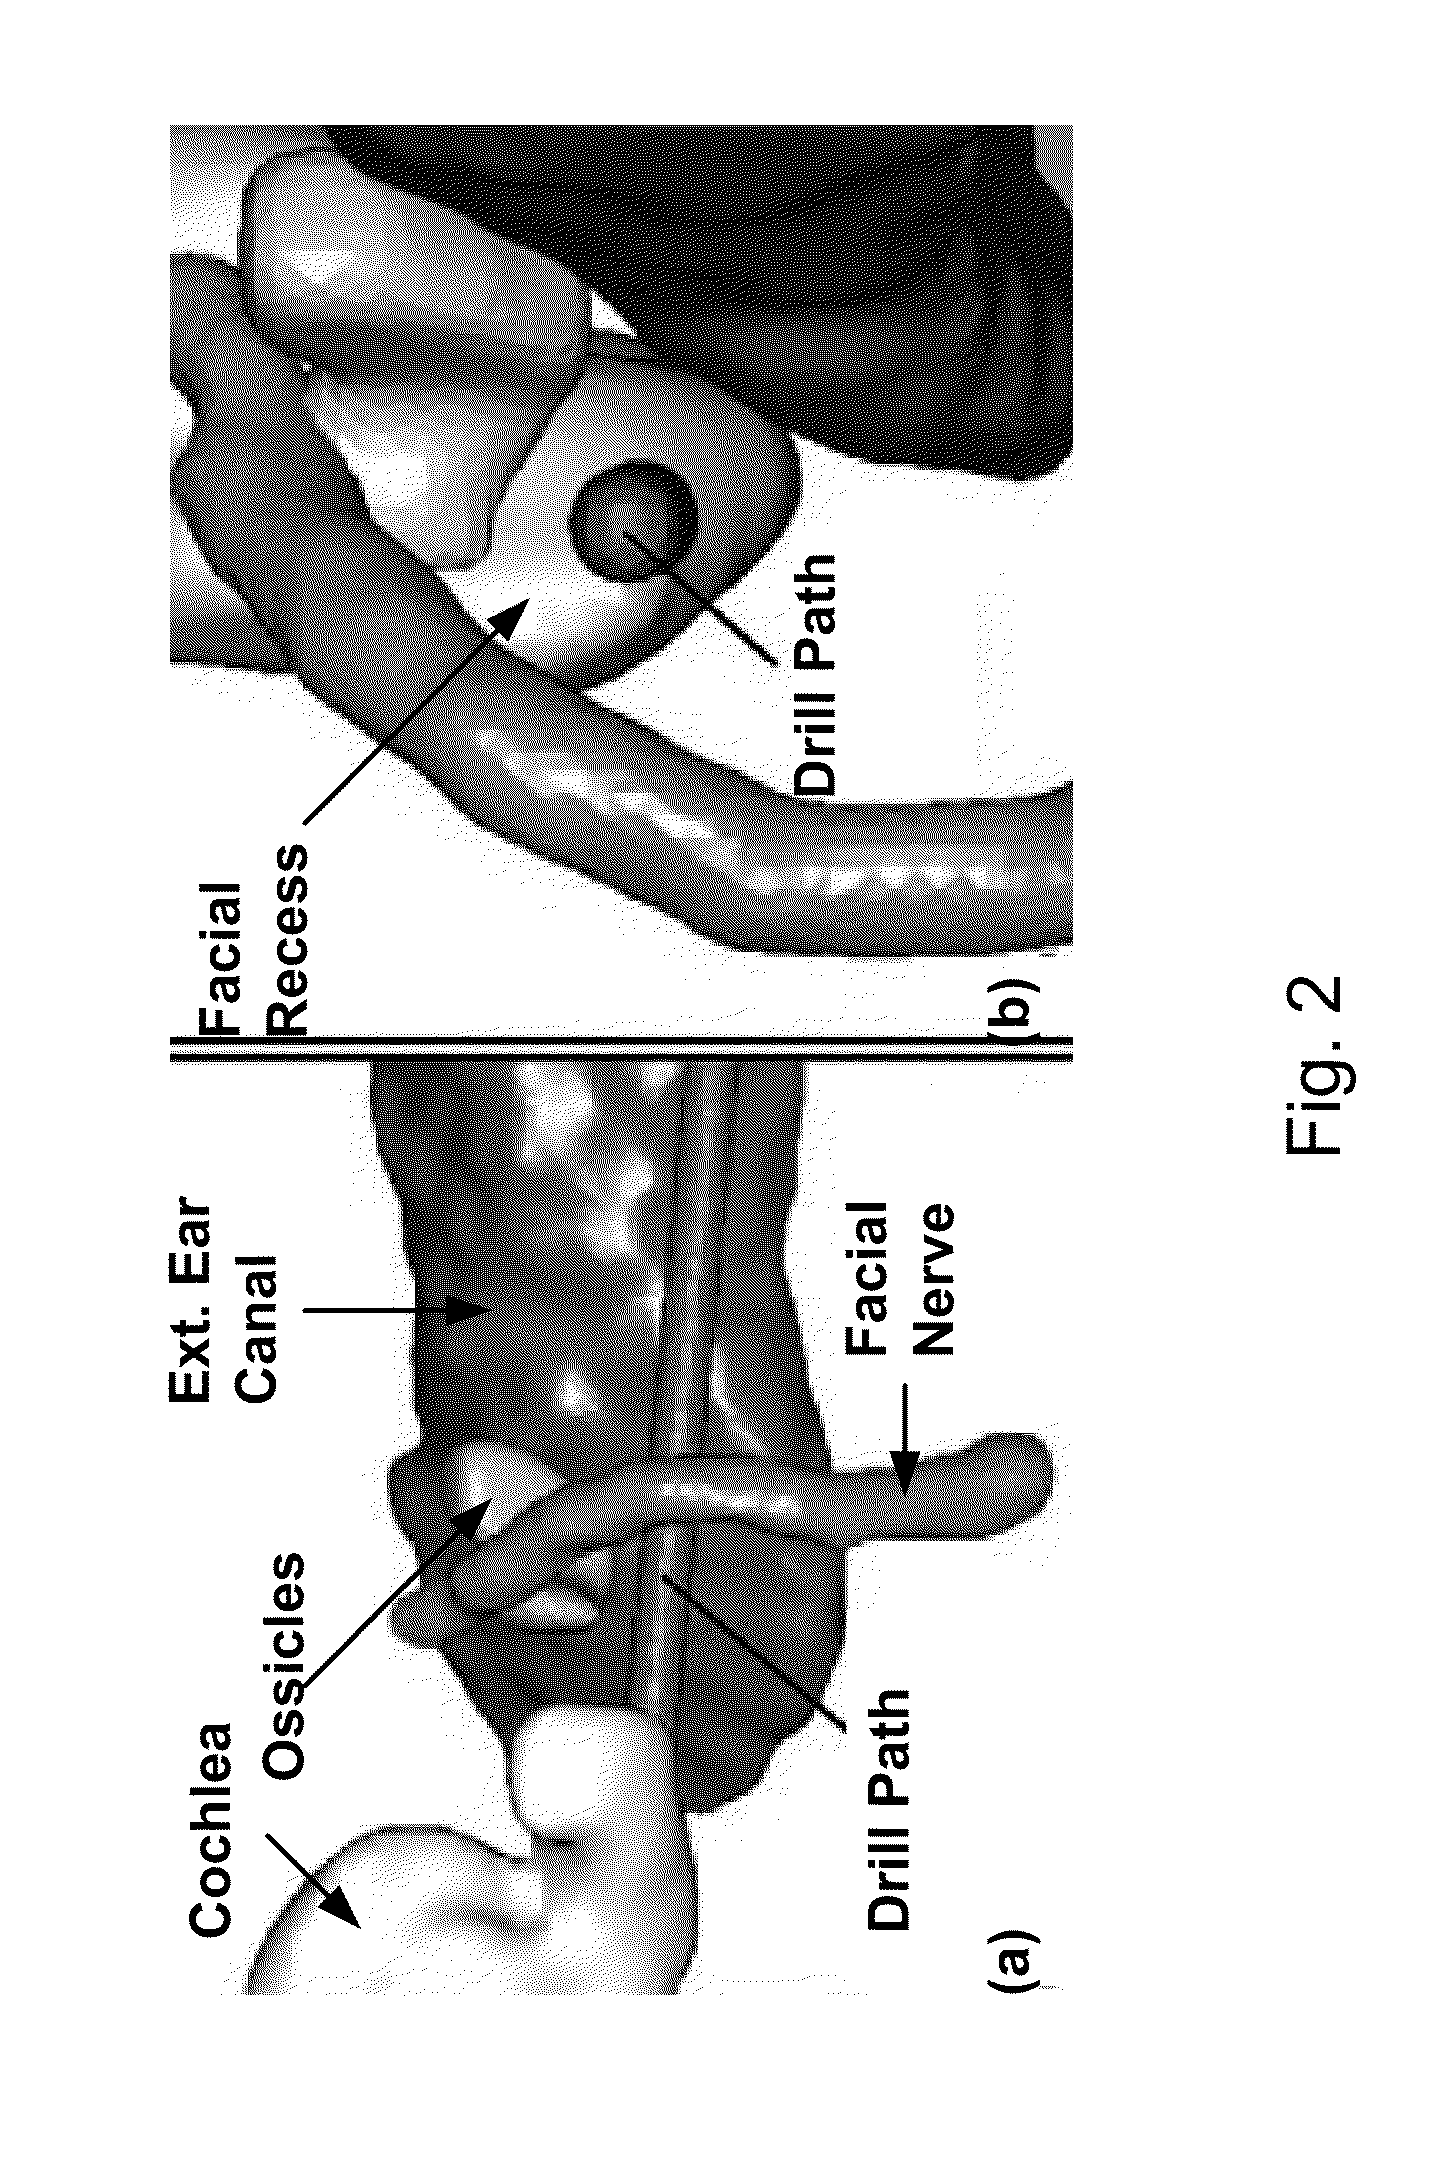 Apparatus and methods for percutaneous cochlear implantation